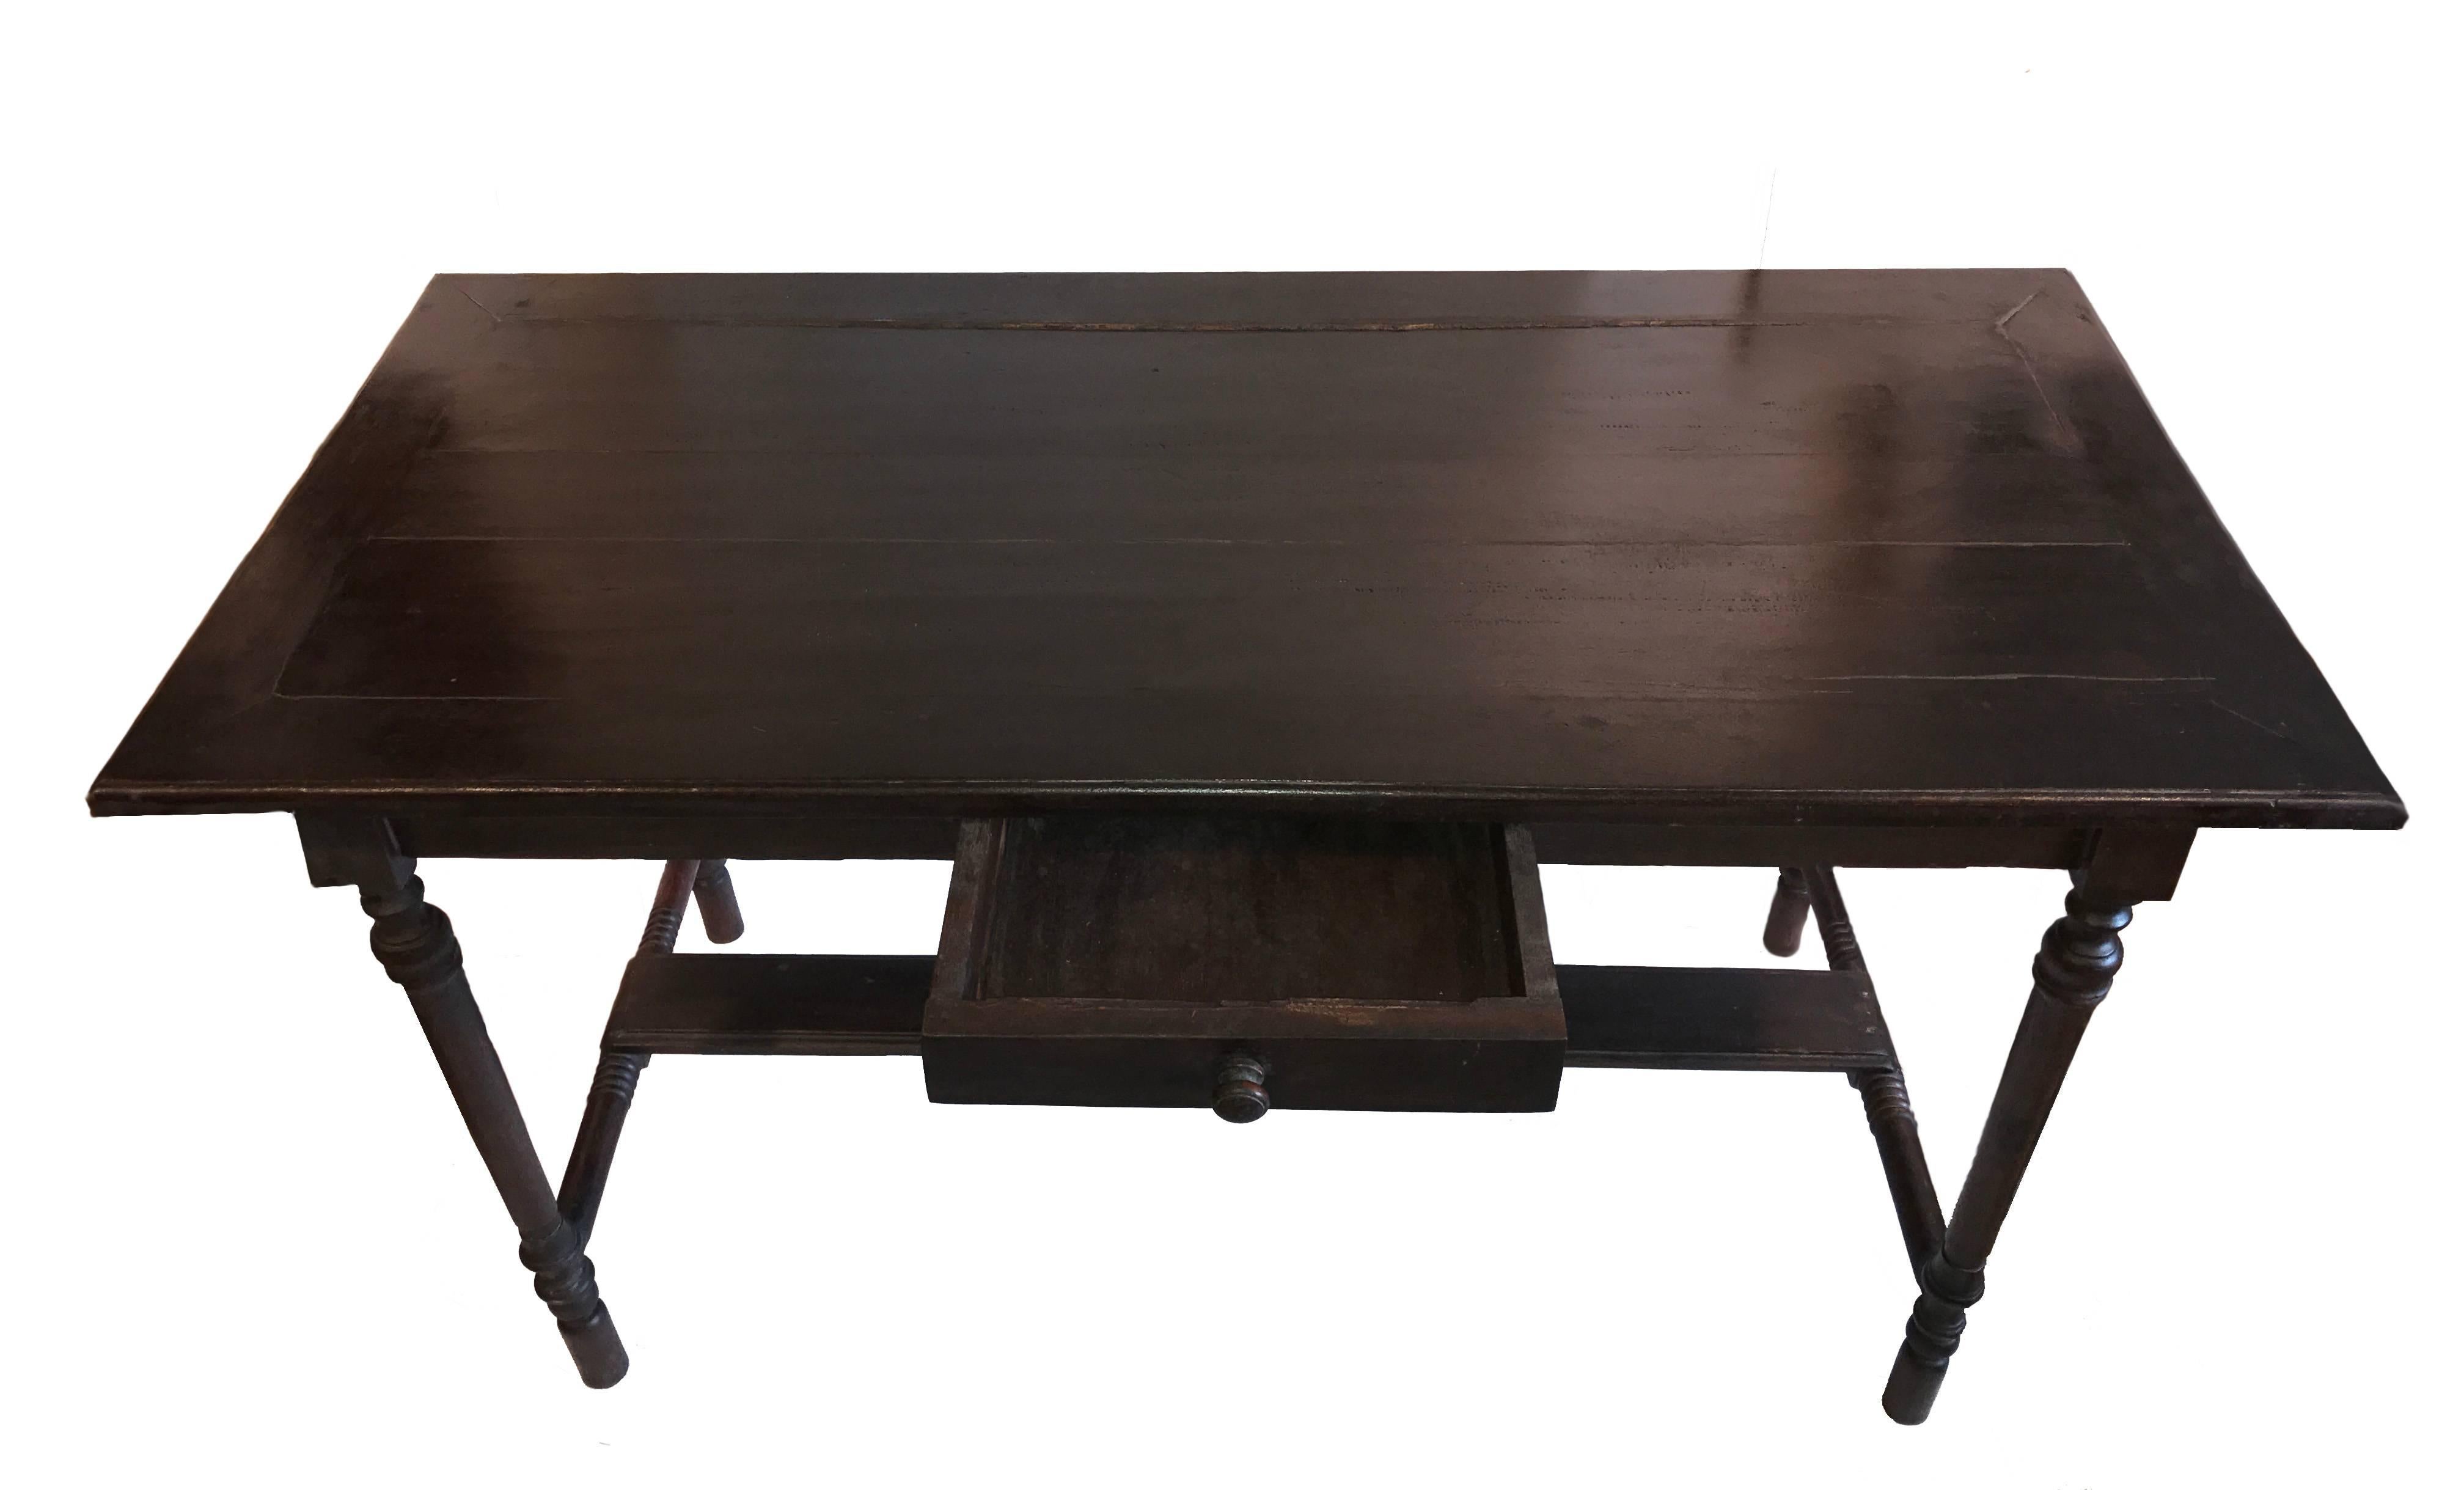 A dark wood Dutch Colonial-style desk with a single drawer, turned legs and side stretchers with footrest. This desk shows a solid, sturdy craftsmanship, while carrying the charming signs of a vintage, timeless piece of furniture.